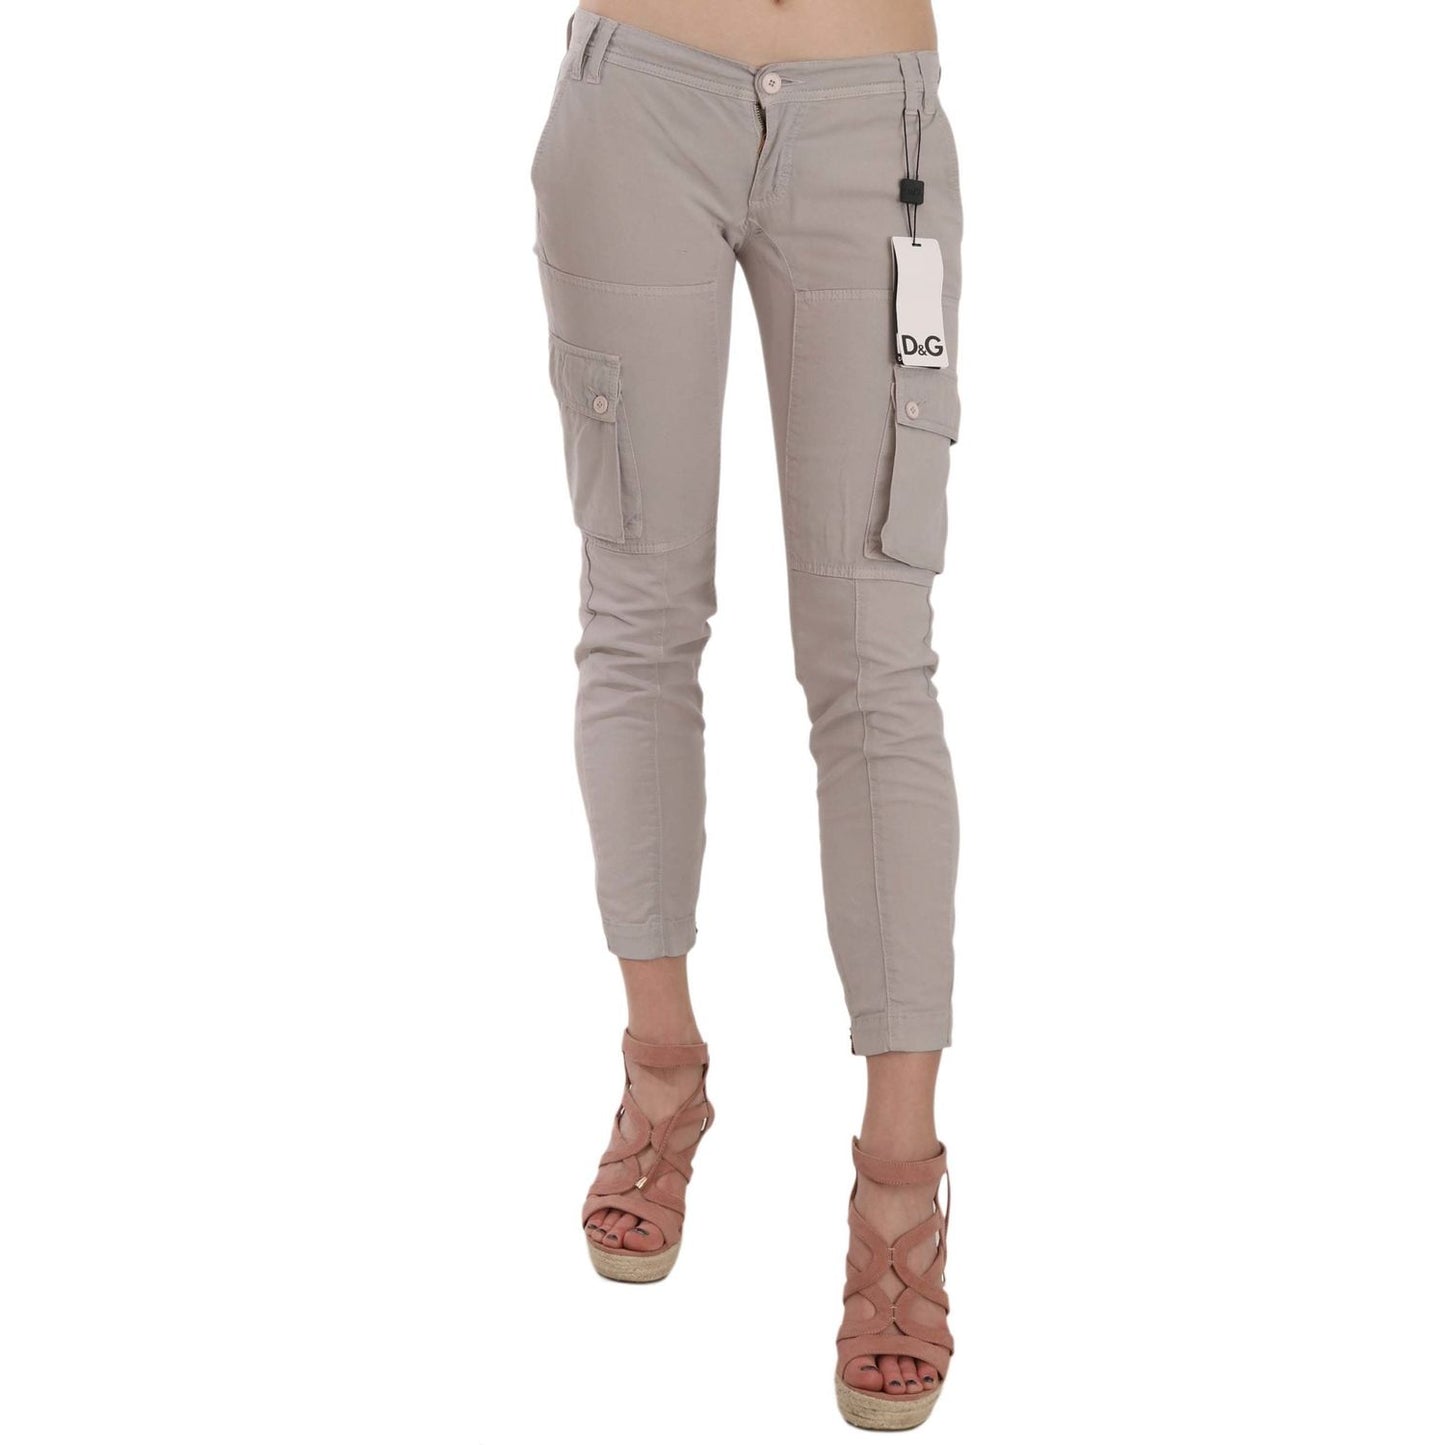 Dolce & Gabbana Chic Khaki Cotton Blend Trousers casual-fitted-khaki-trousers-pants